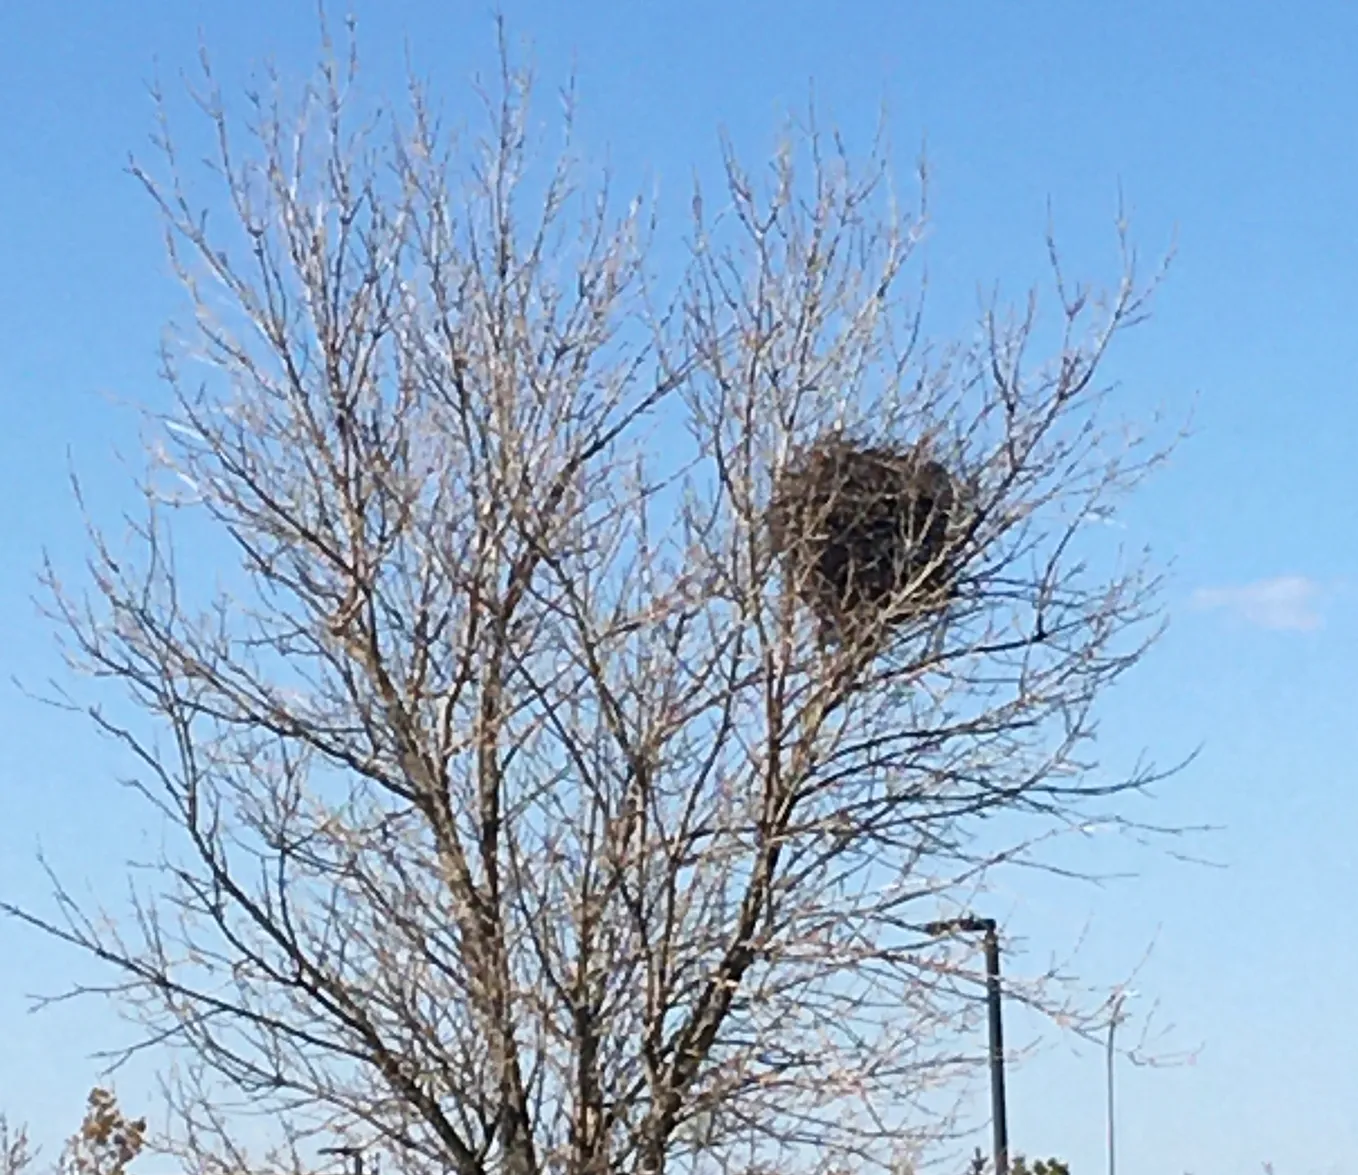 Magpie nest in a bare tree in spring. photo taken by the author. credit Jane Harris